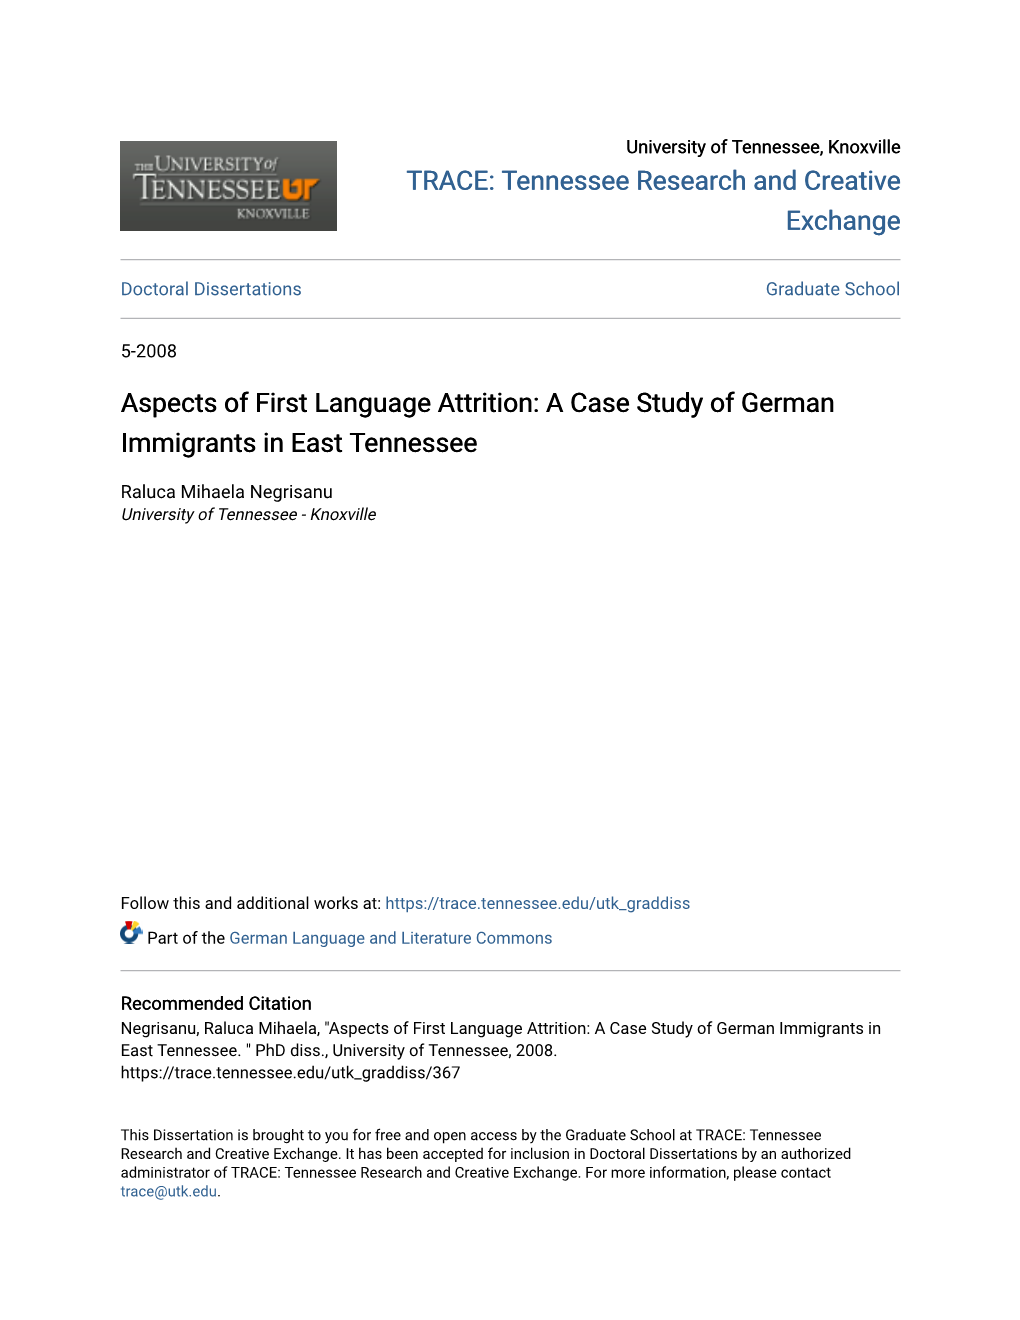 Aspects of First Language Attrition: a Case Study of German Immigrants in East Tennessee